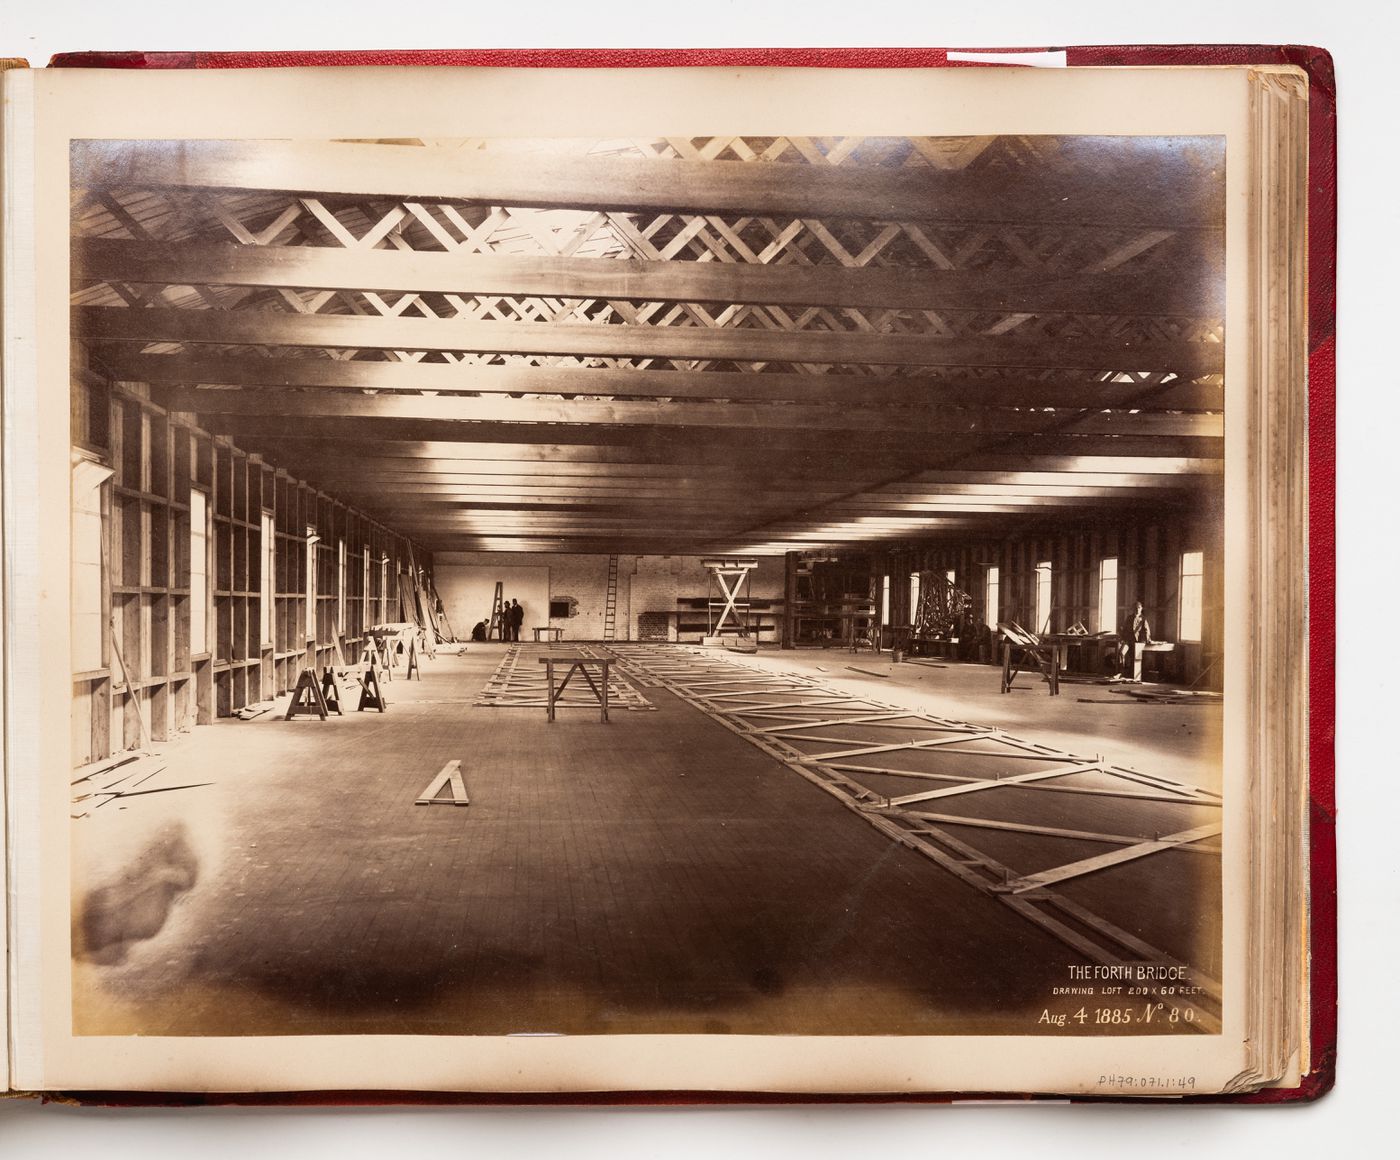 Interior view of a workshop for the construction of the Forth Bridge, Firth of Forth, Scotland, United Kingdom